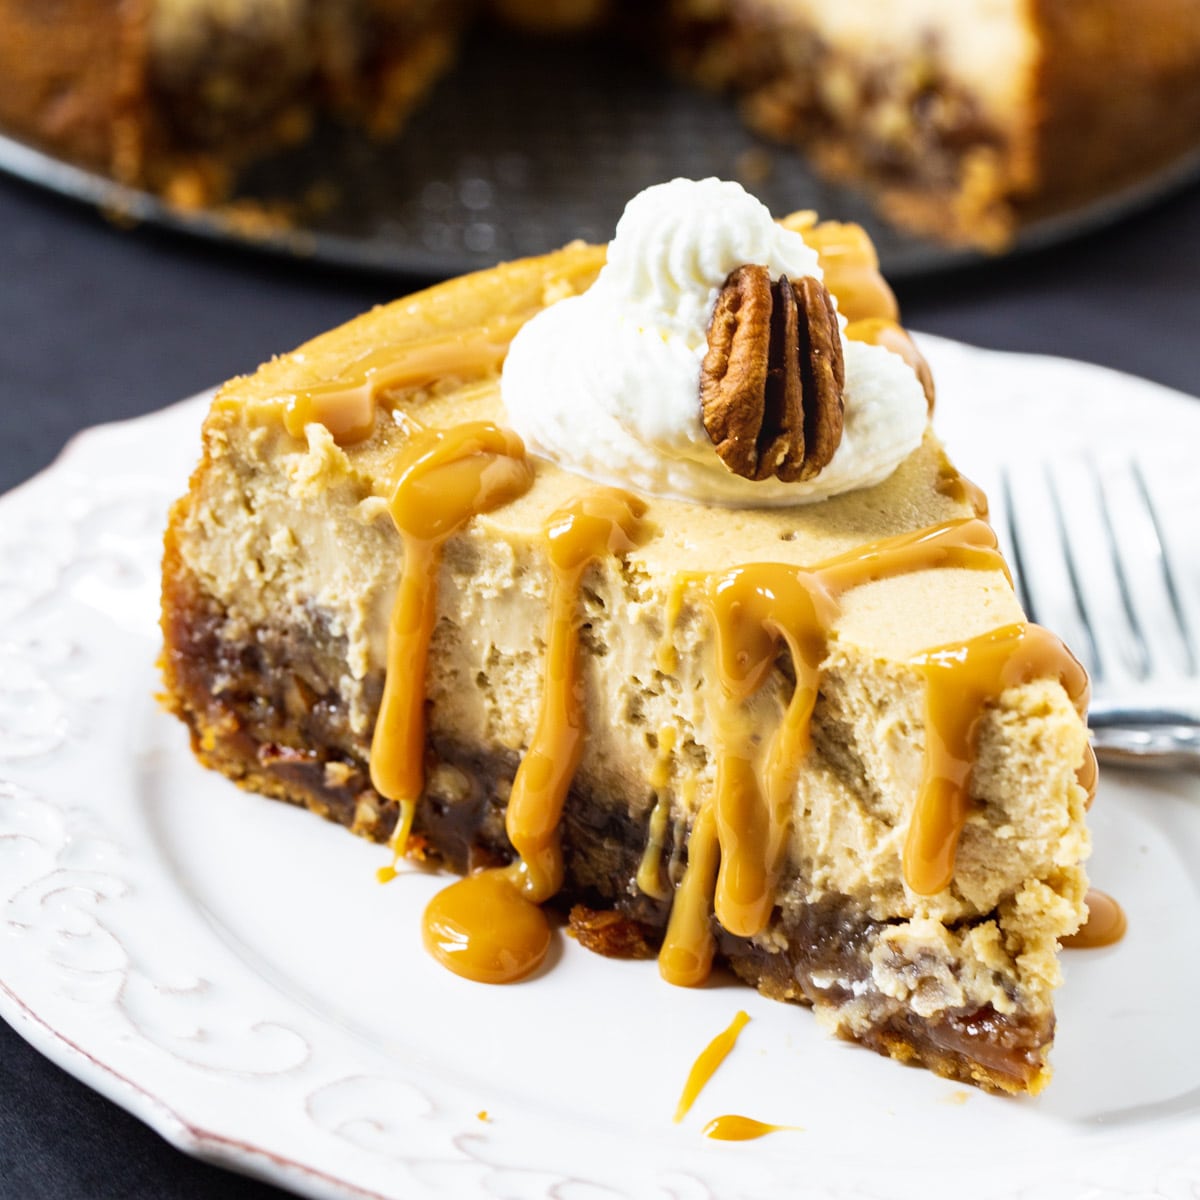 Slice of Pecan Pie Cheesecake topped with whipped cream and caramel sauce.